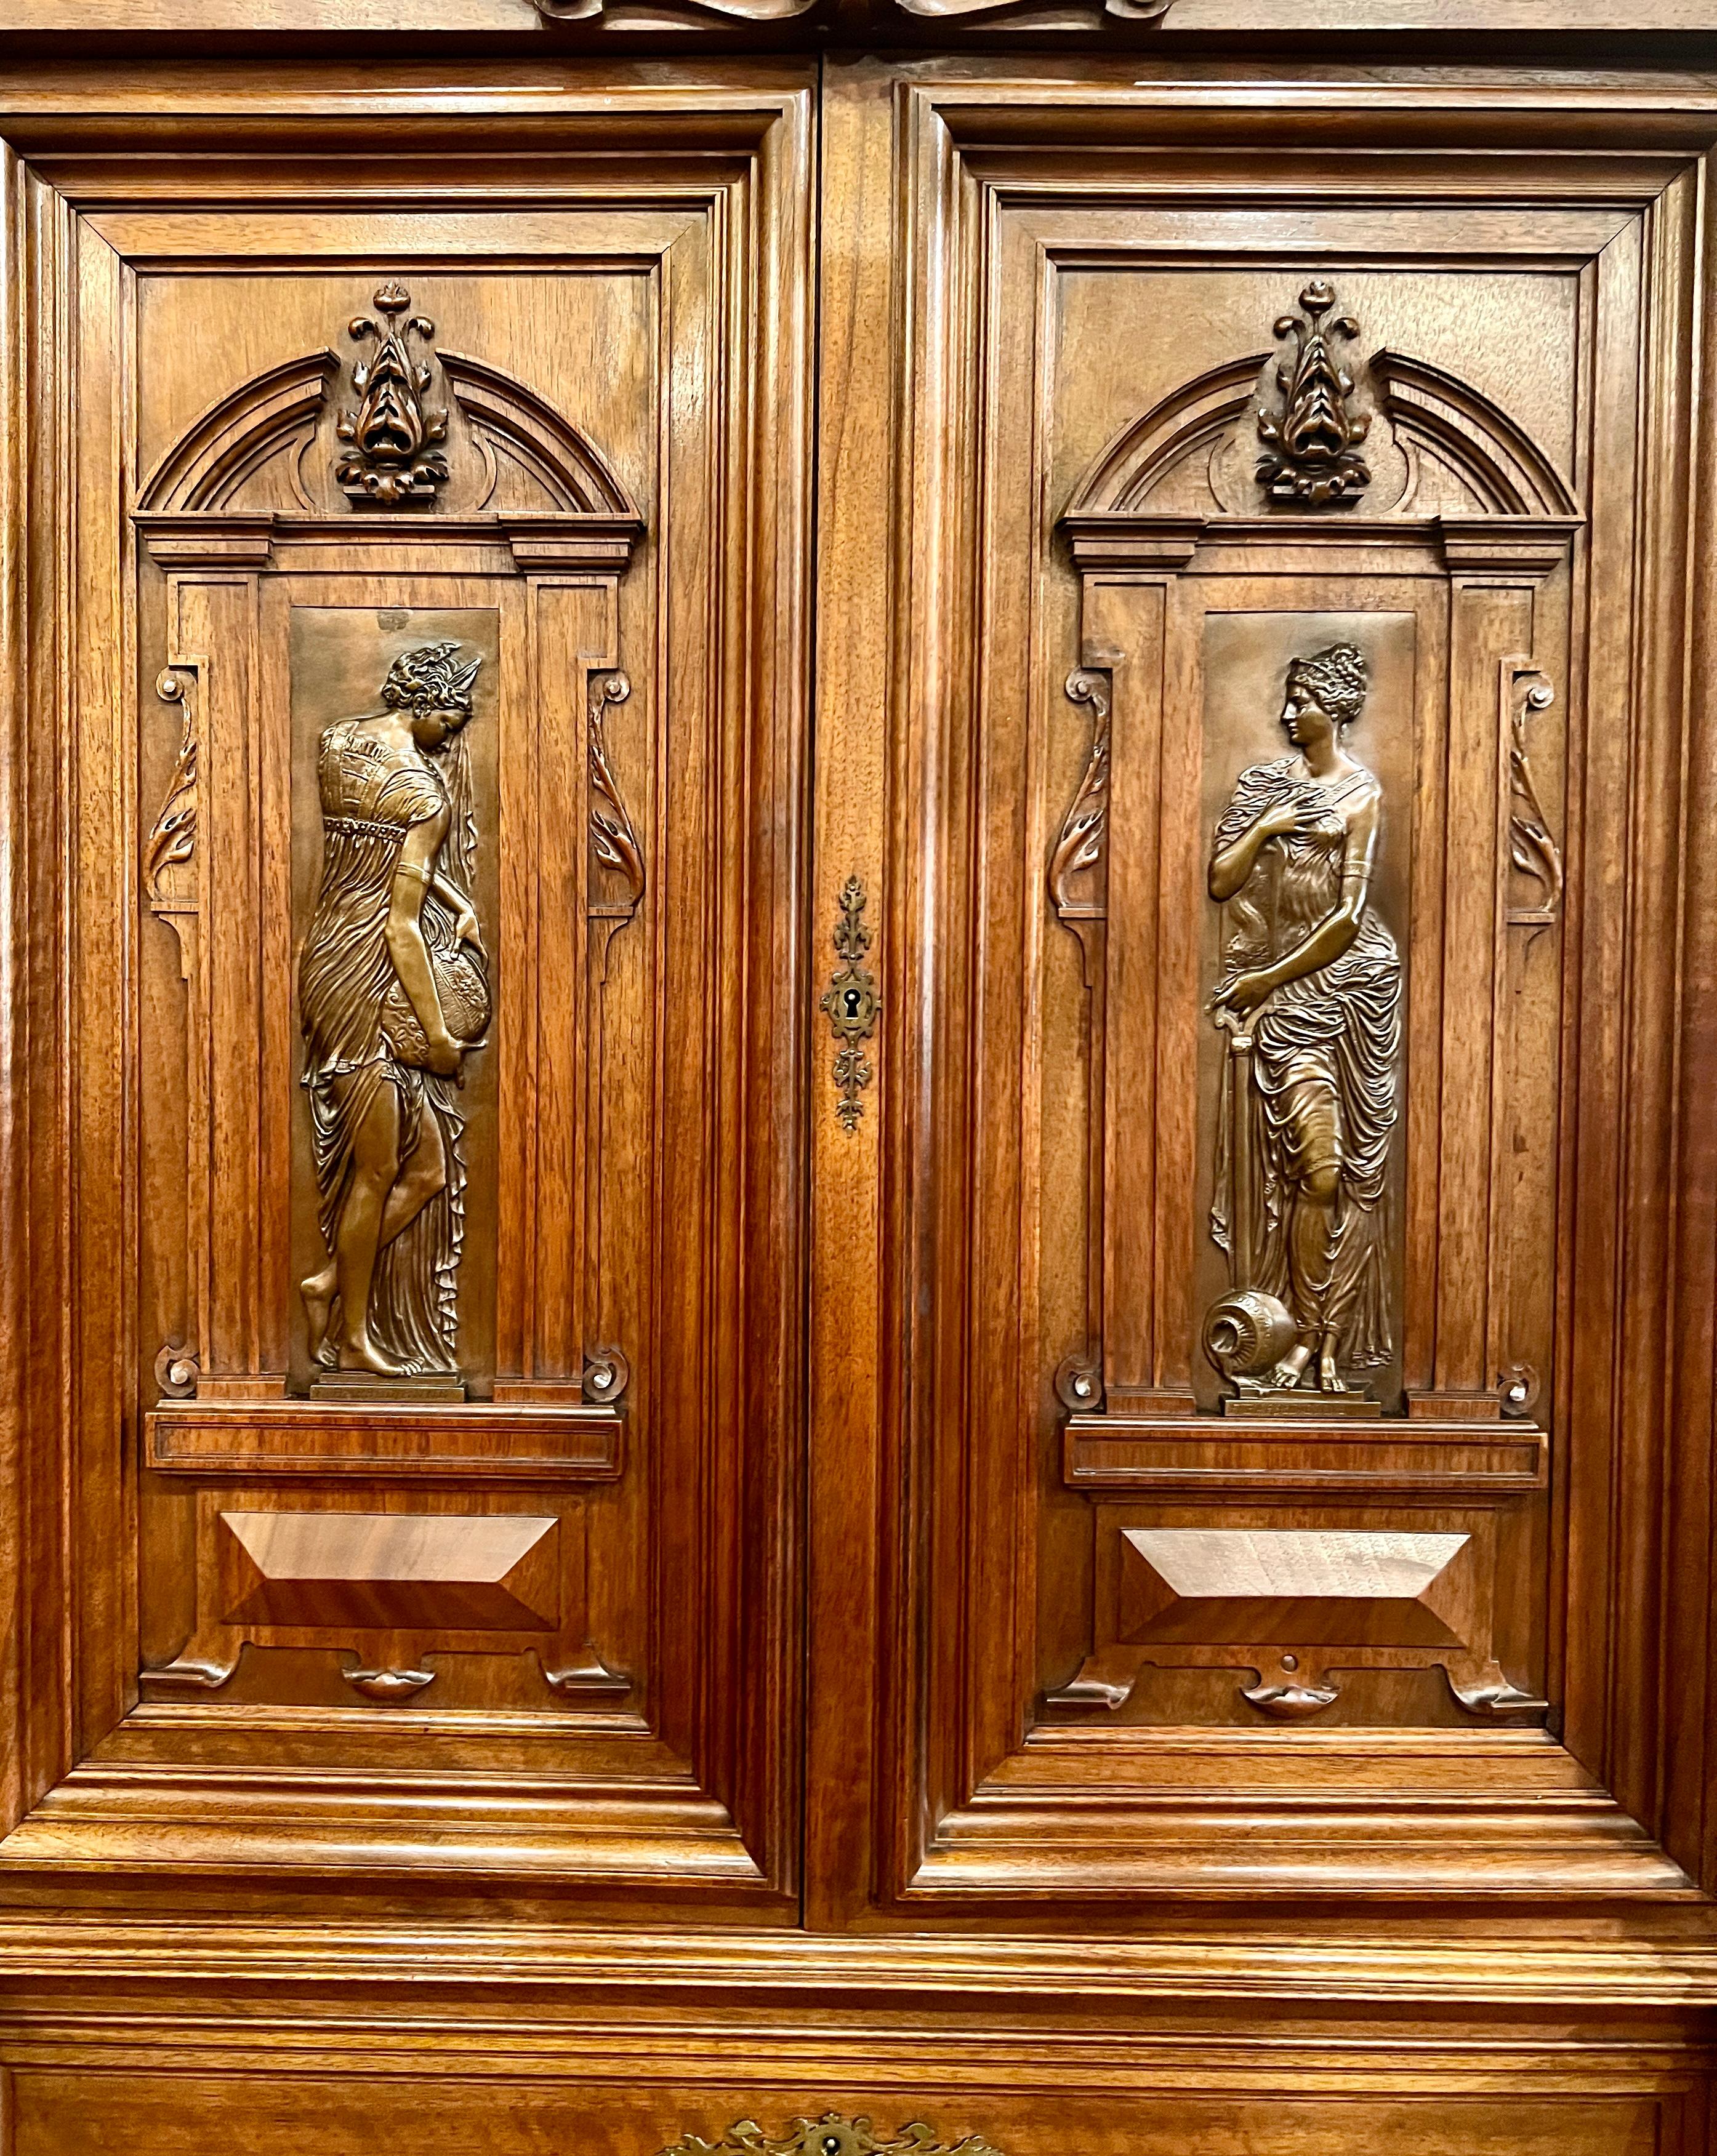 19th Century Antique French Walnut Renaissance Cabinet with Bronze Plaques by Barbedienne. For Sale